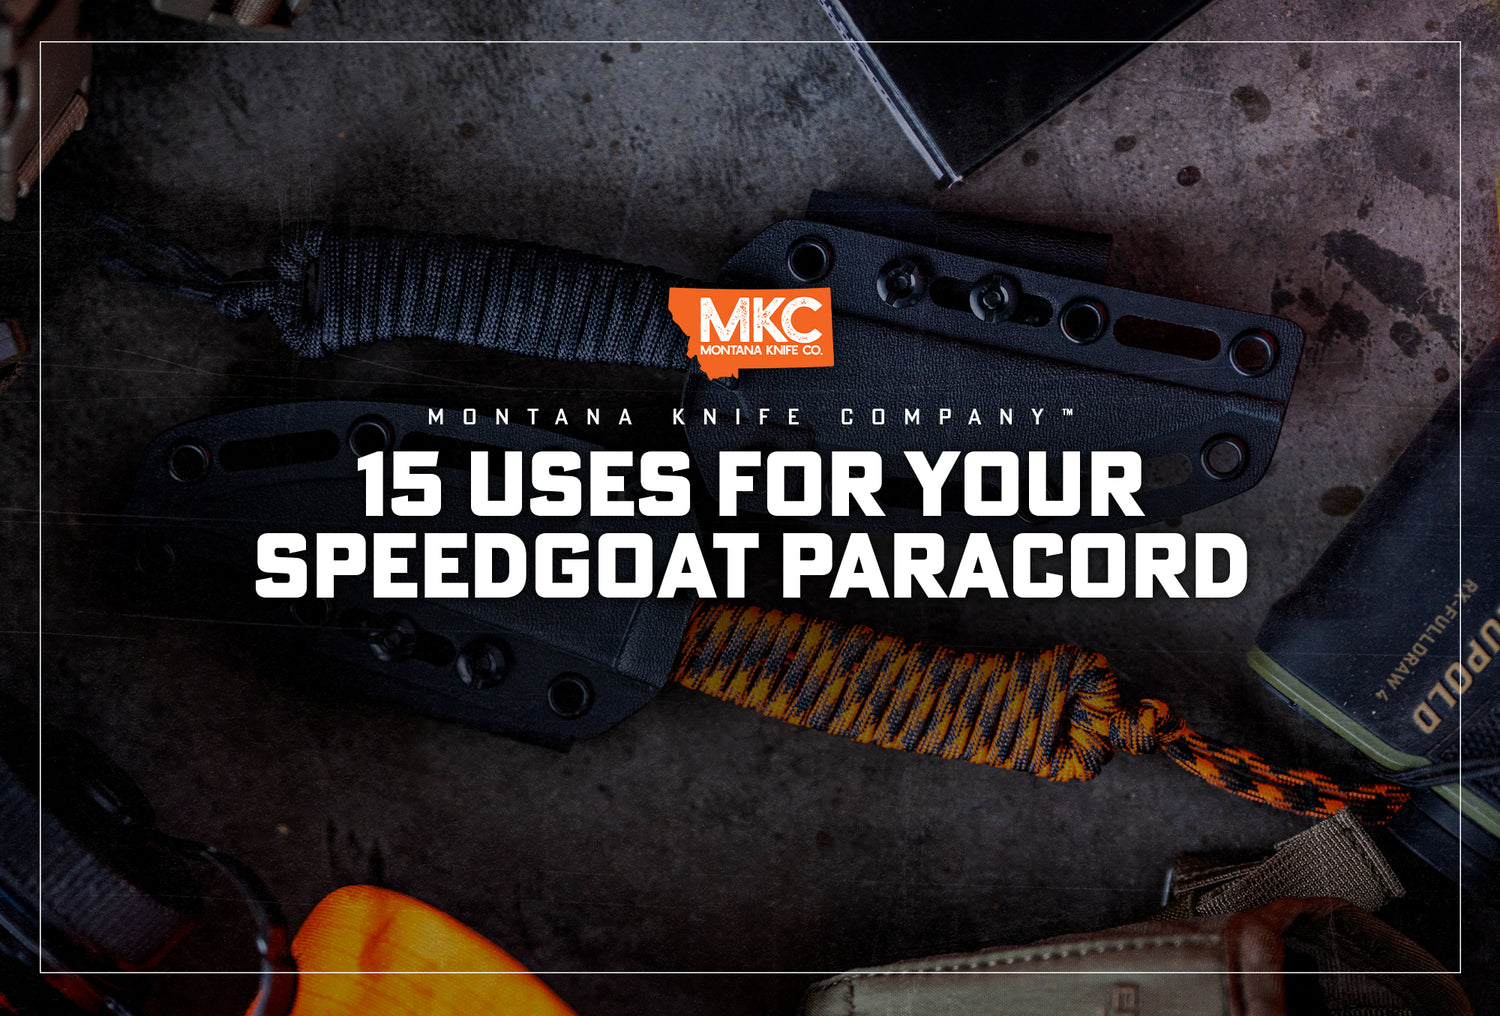 15 Uses for Your Speedgoat Paracord